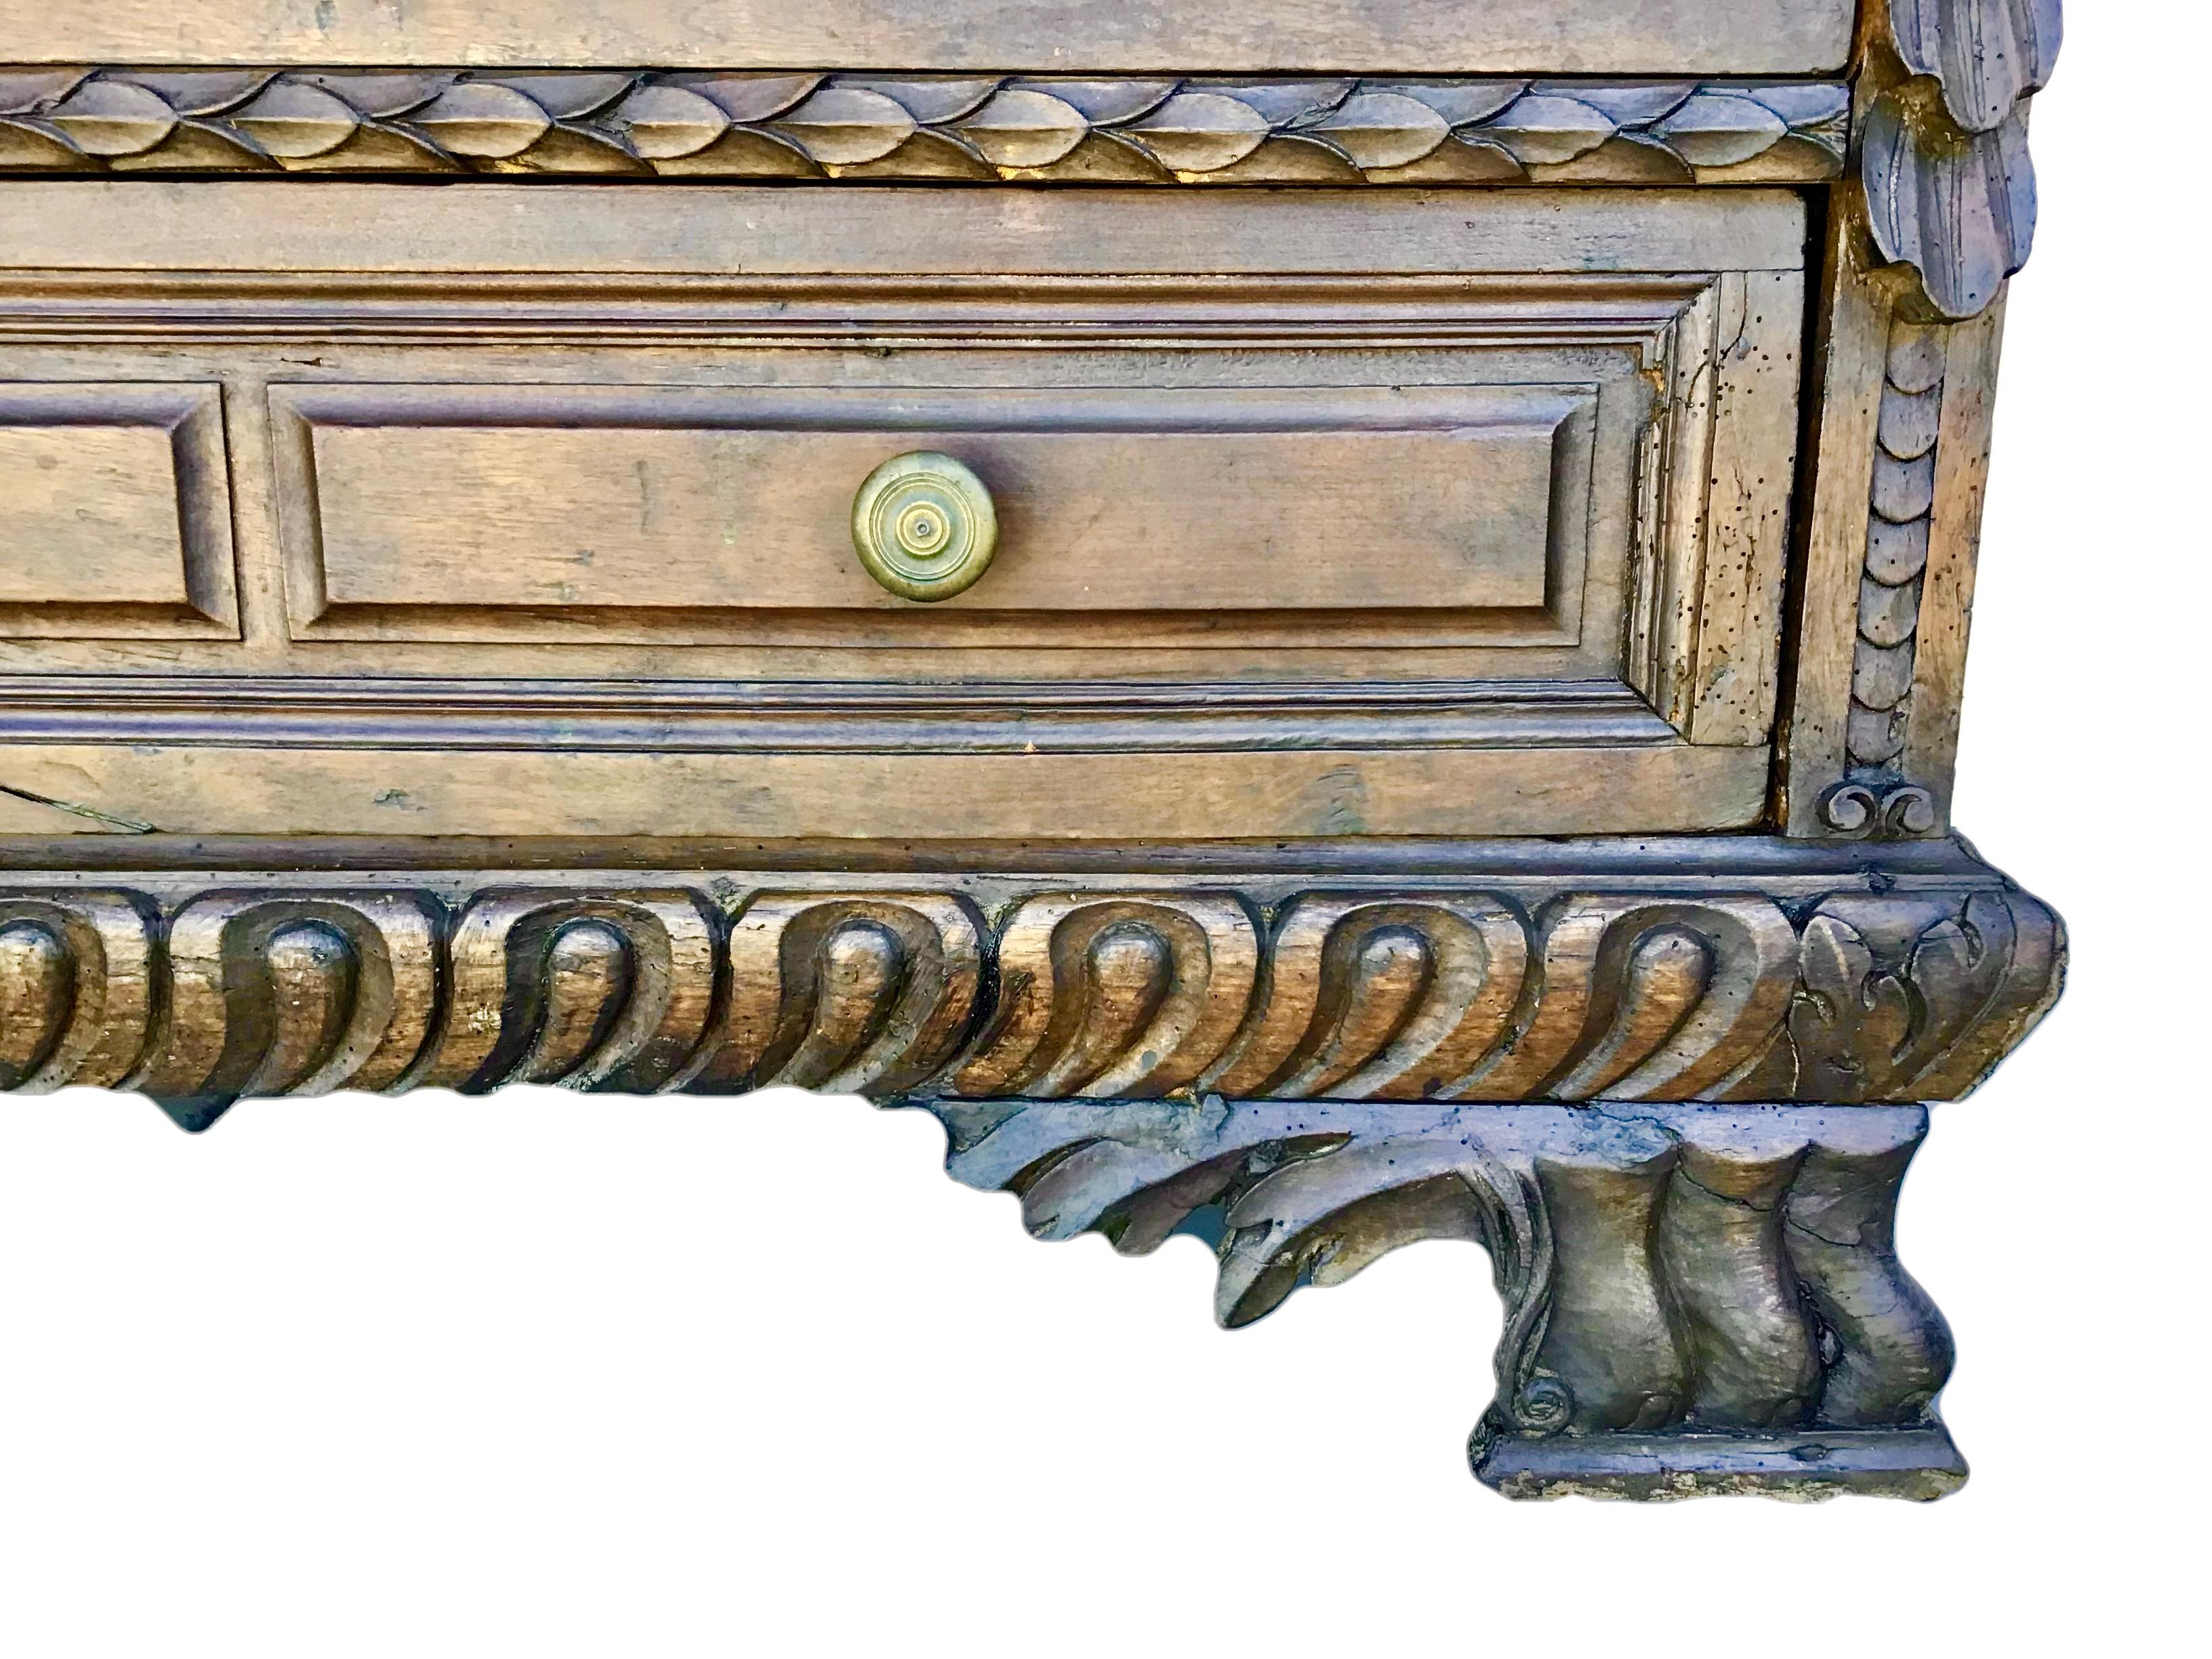 Fabulous chest of drawers in solid walnut with 4 drawers. This Baroque walnut commode from Italy is exquisitely flanked with a pair of carved side posts and 
beautifully hand-carved detail throughout. Original base with oversized winged paw feet.